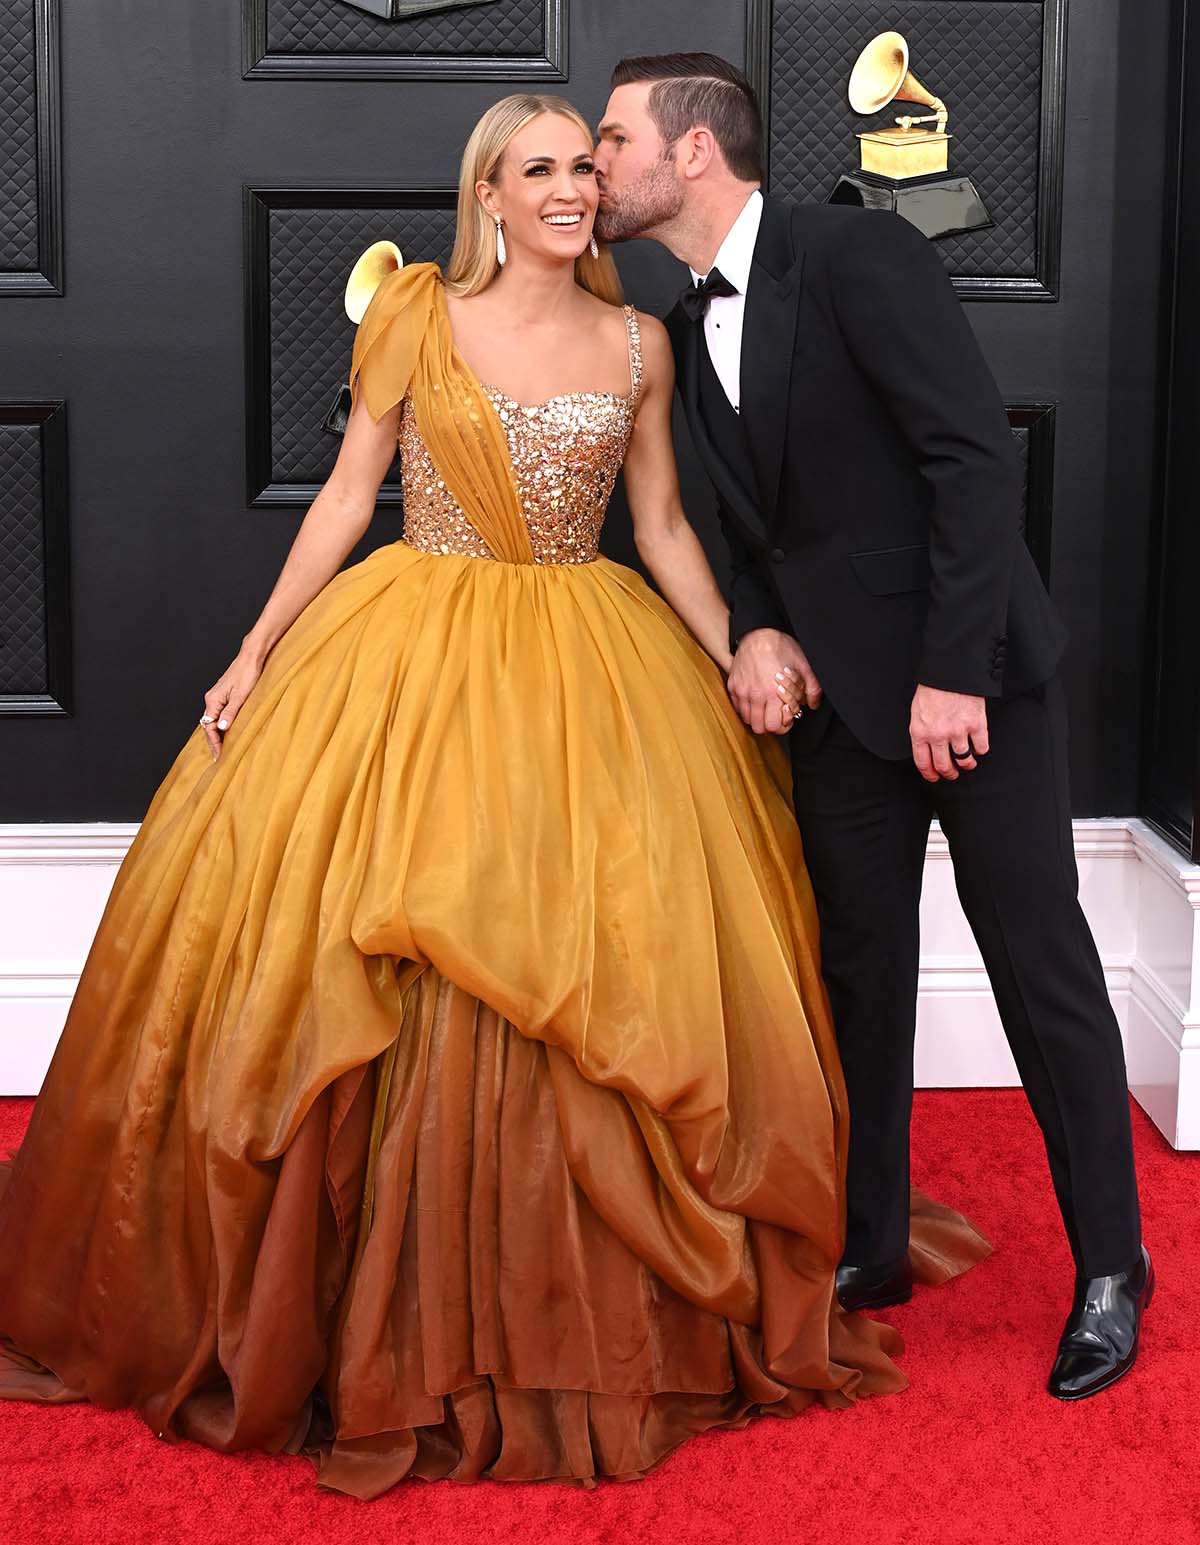 Carrie Underwood And Husband Mike Fisher's Relationship Timeline